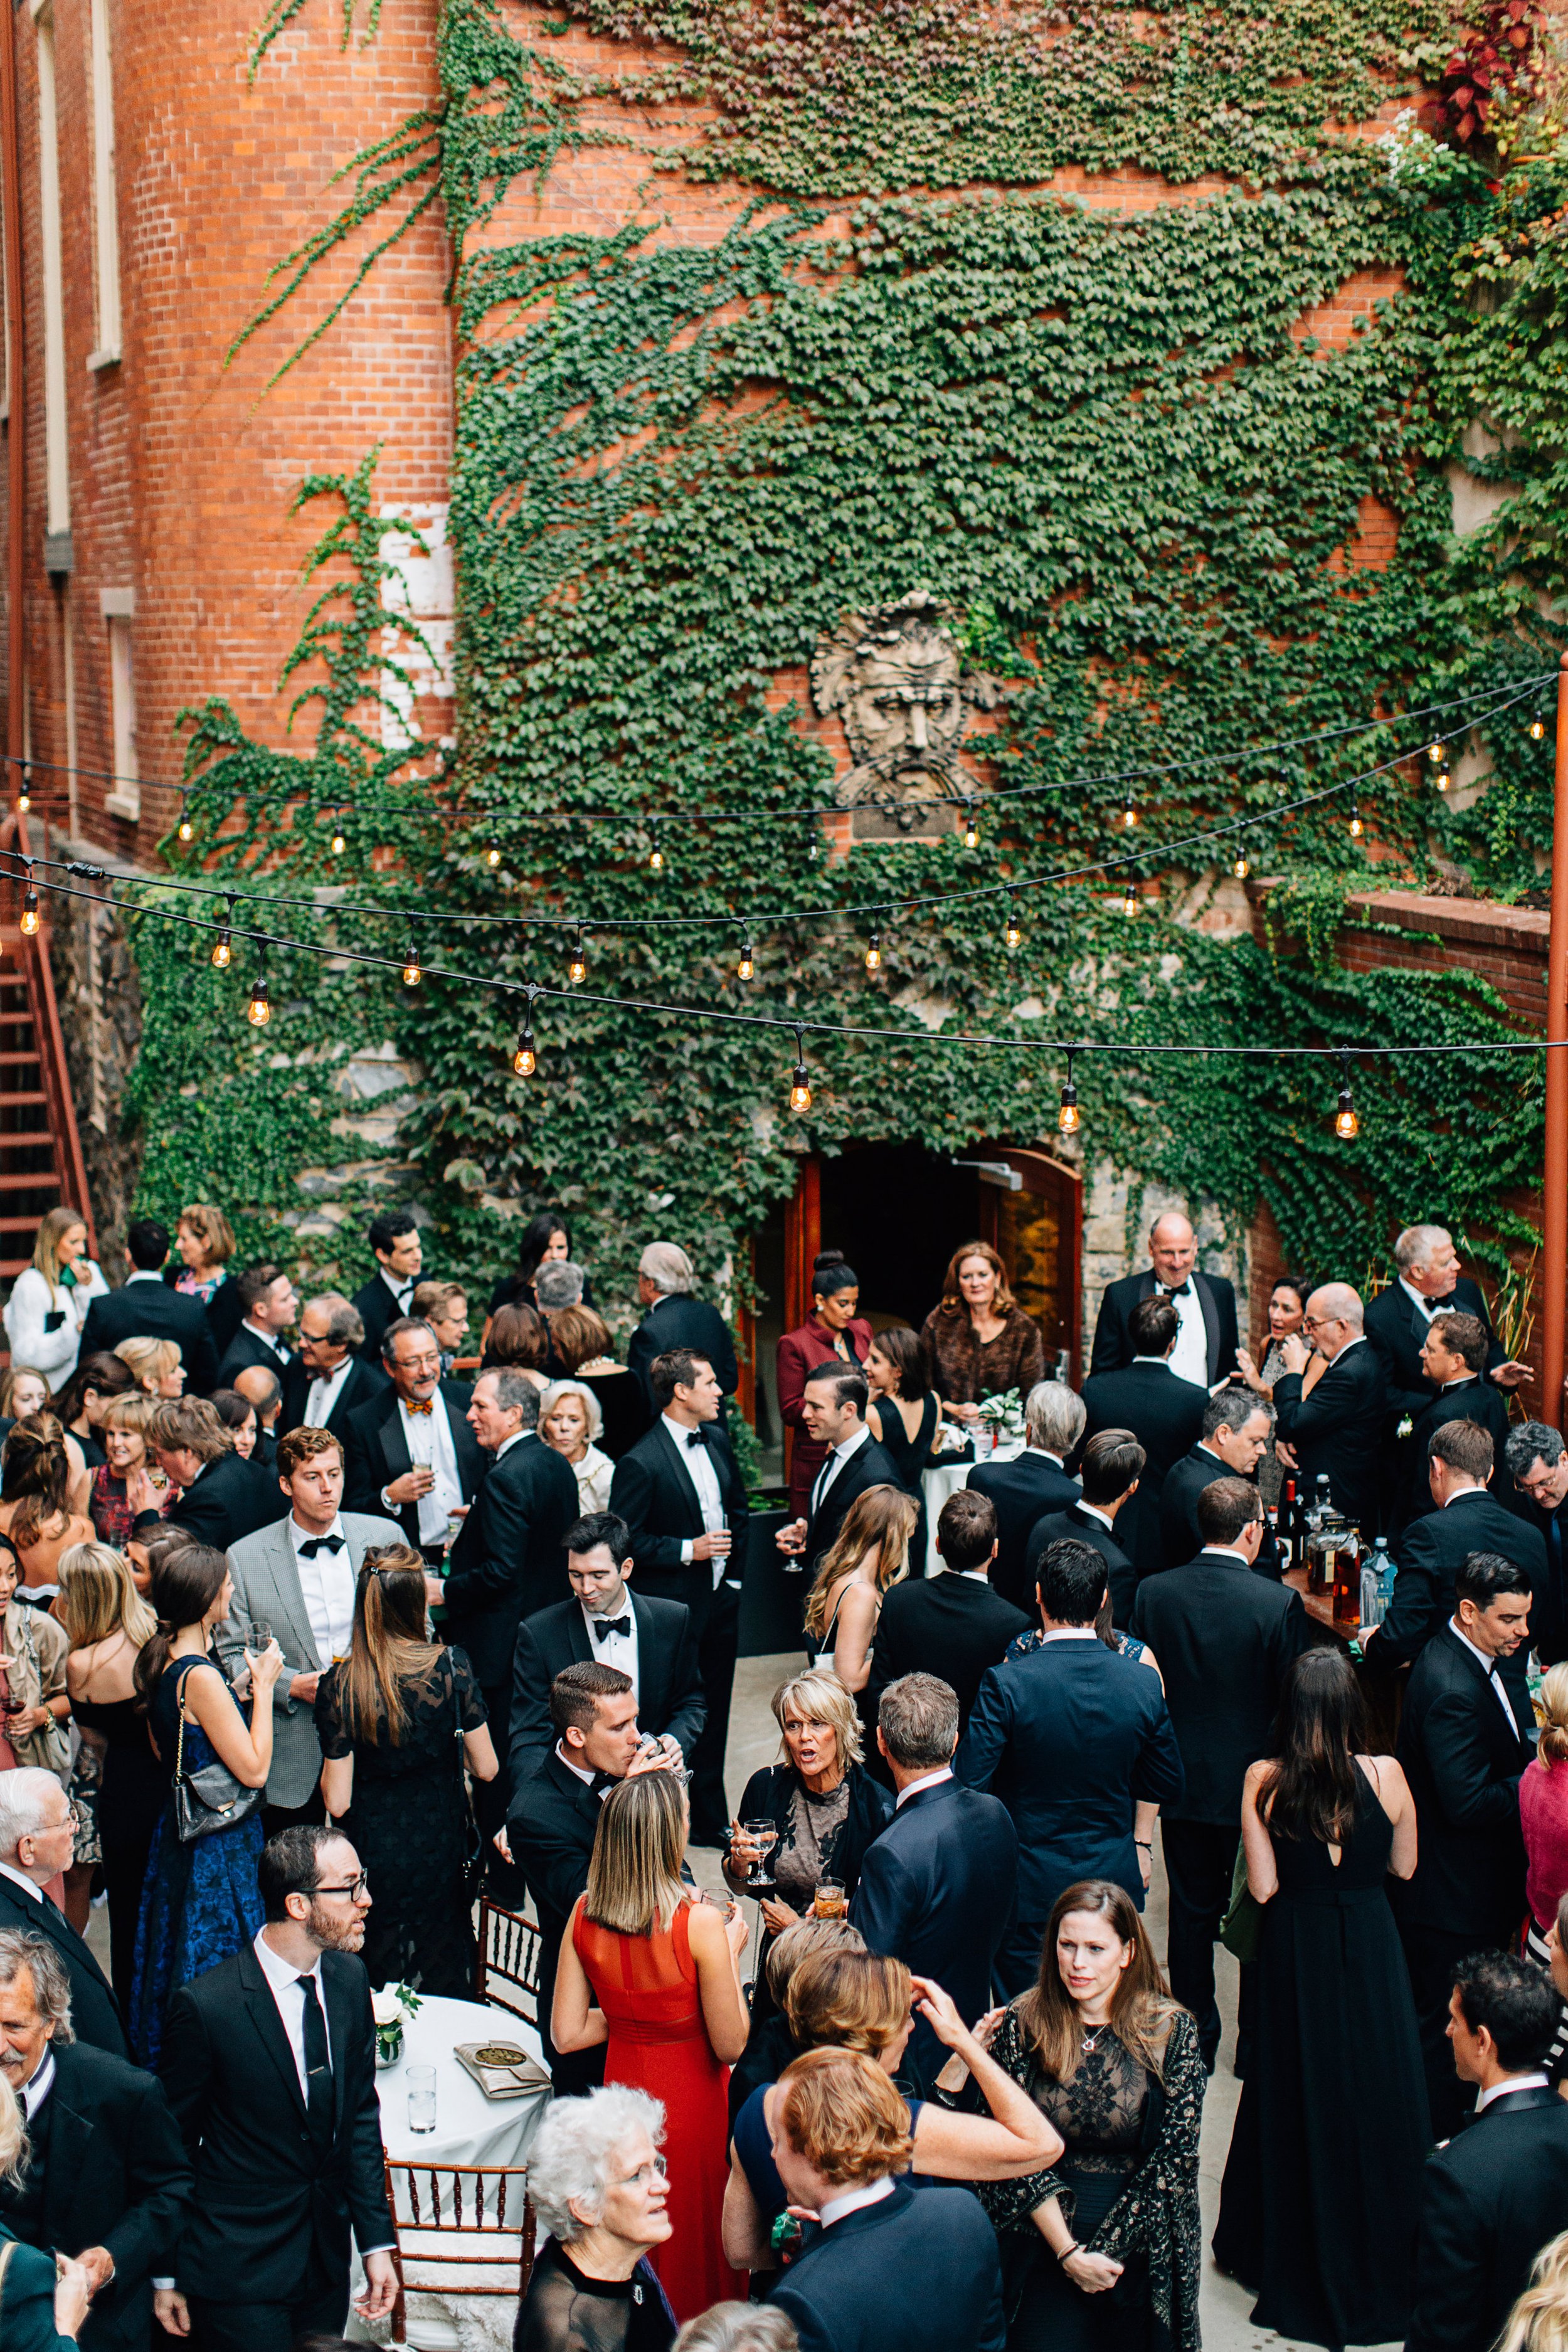 Corporate social event in Garden Courtyard ivy covered brick walls outdoor